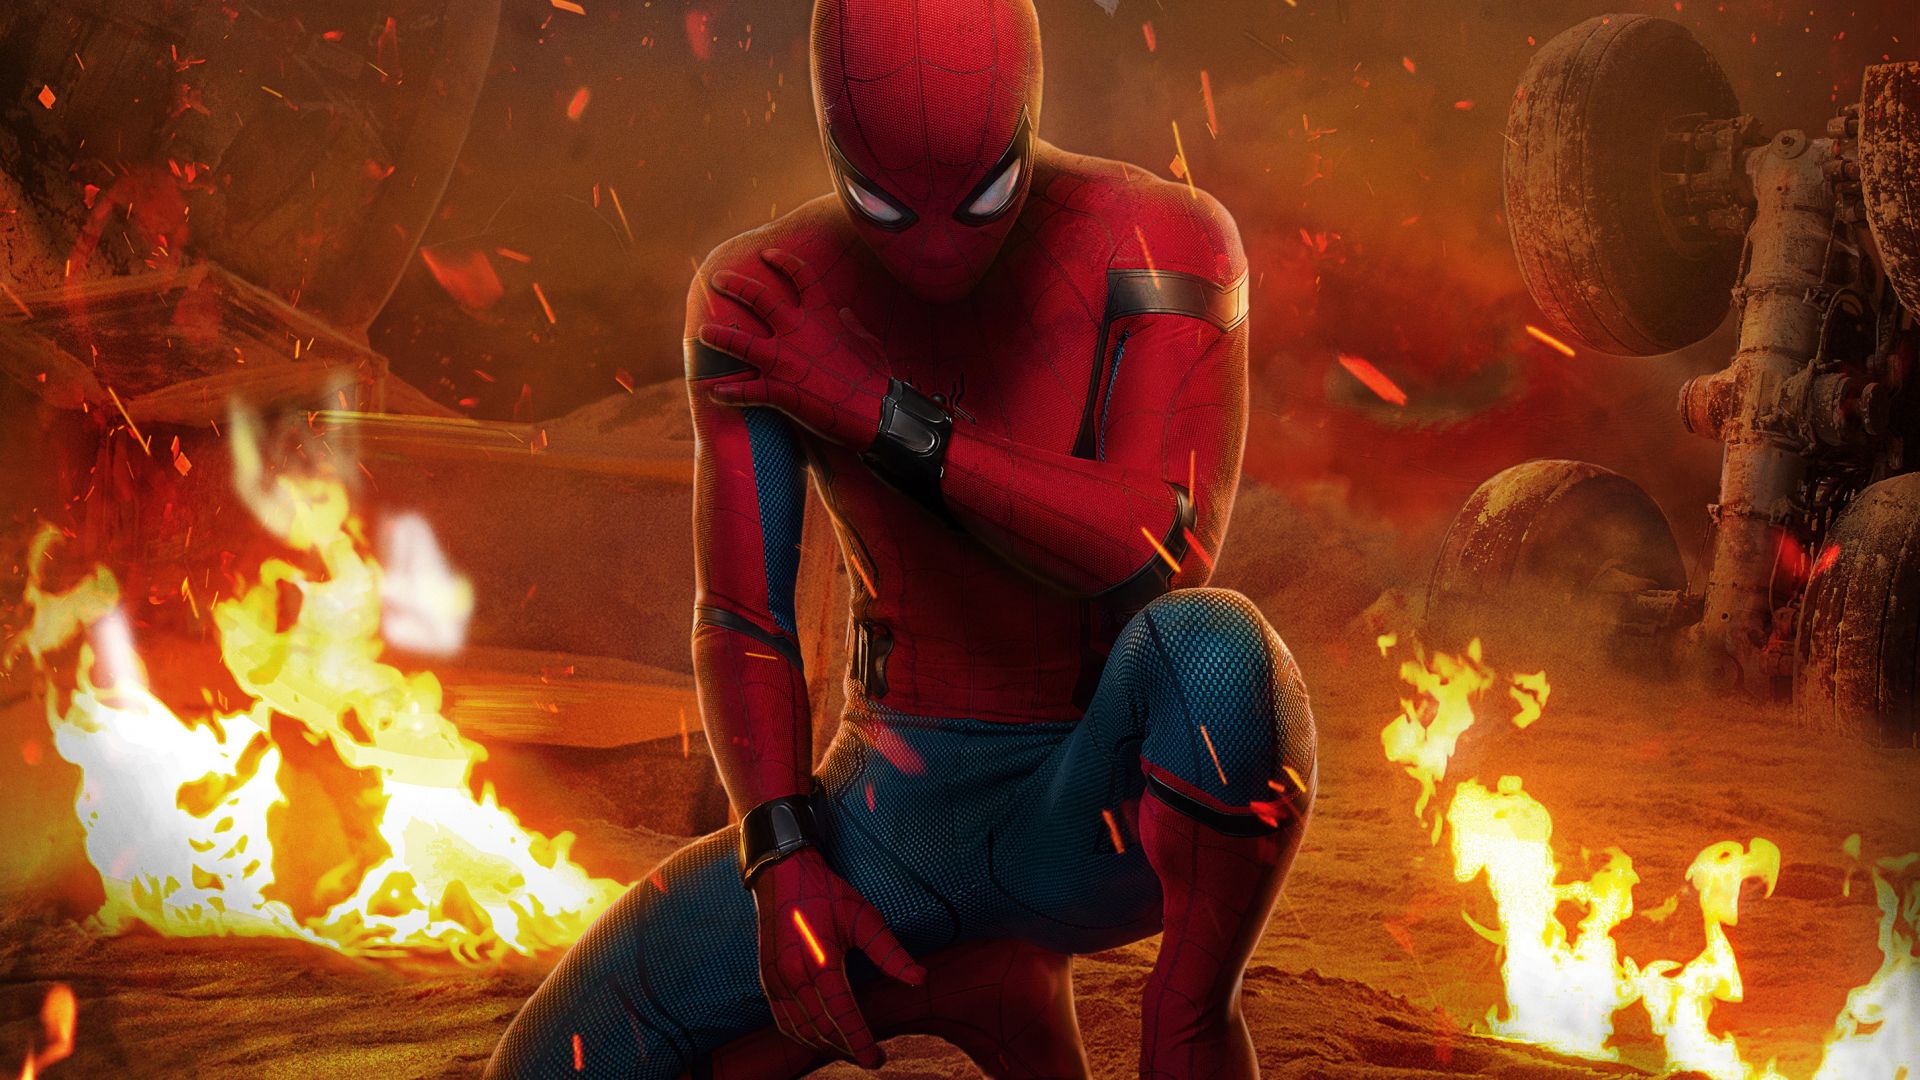 Desktop Wallpaper Spider Man: Homecoming, Movie, Poster, HD Image, Picture, Background, D1ac70